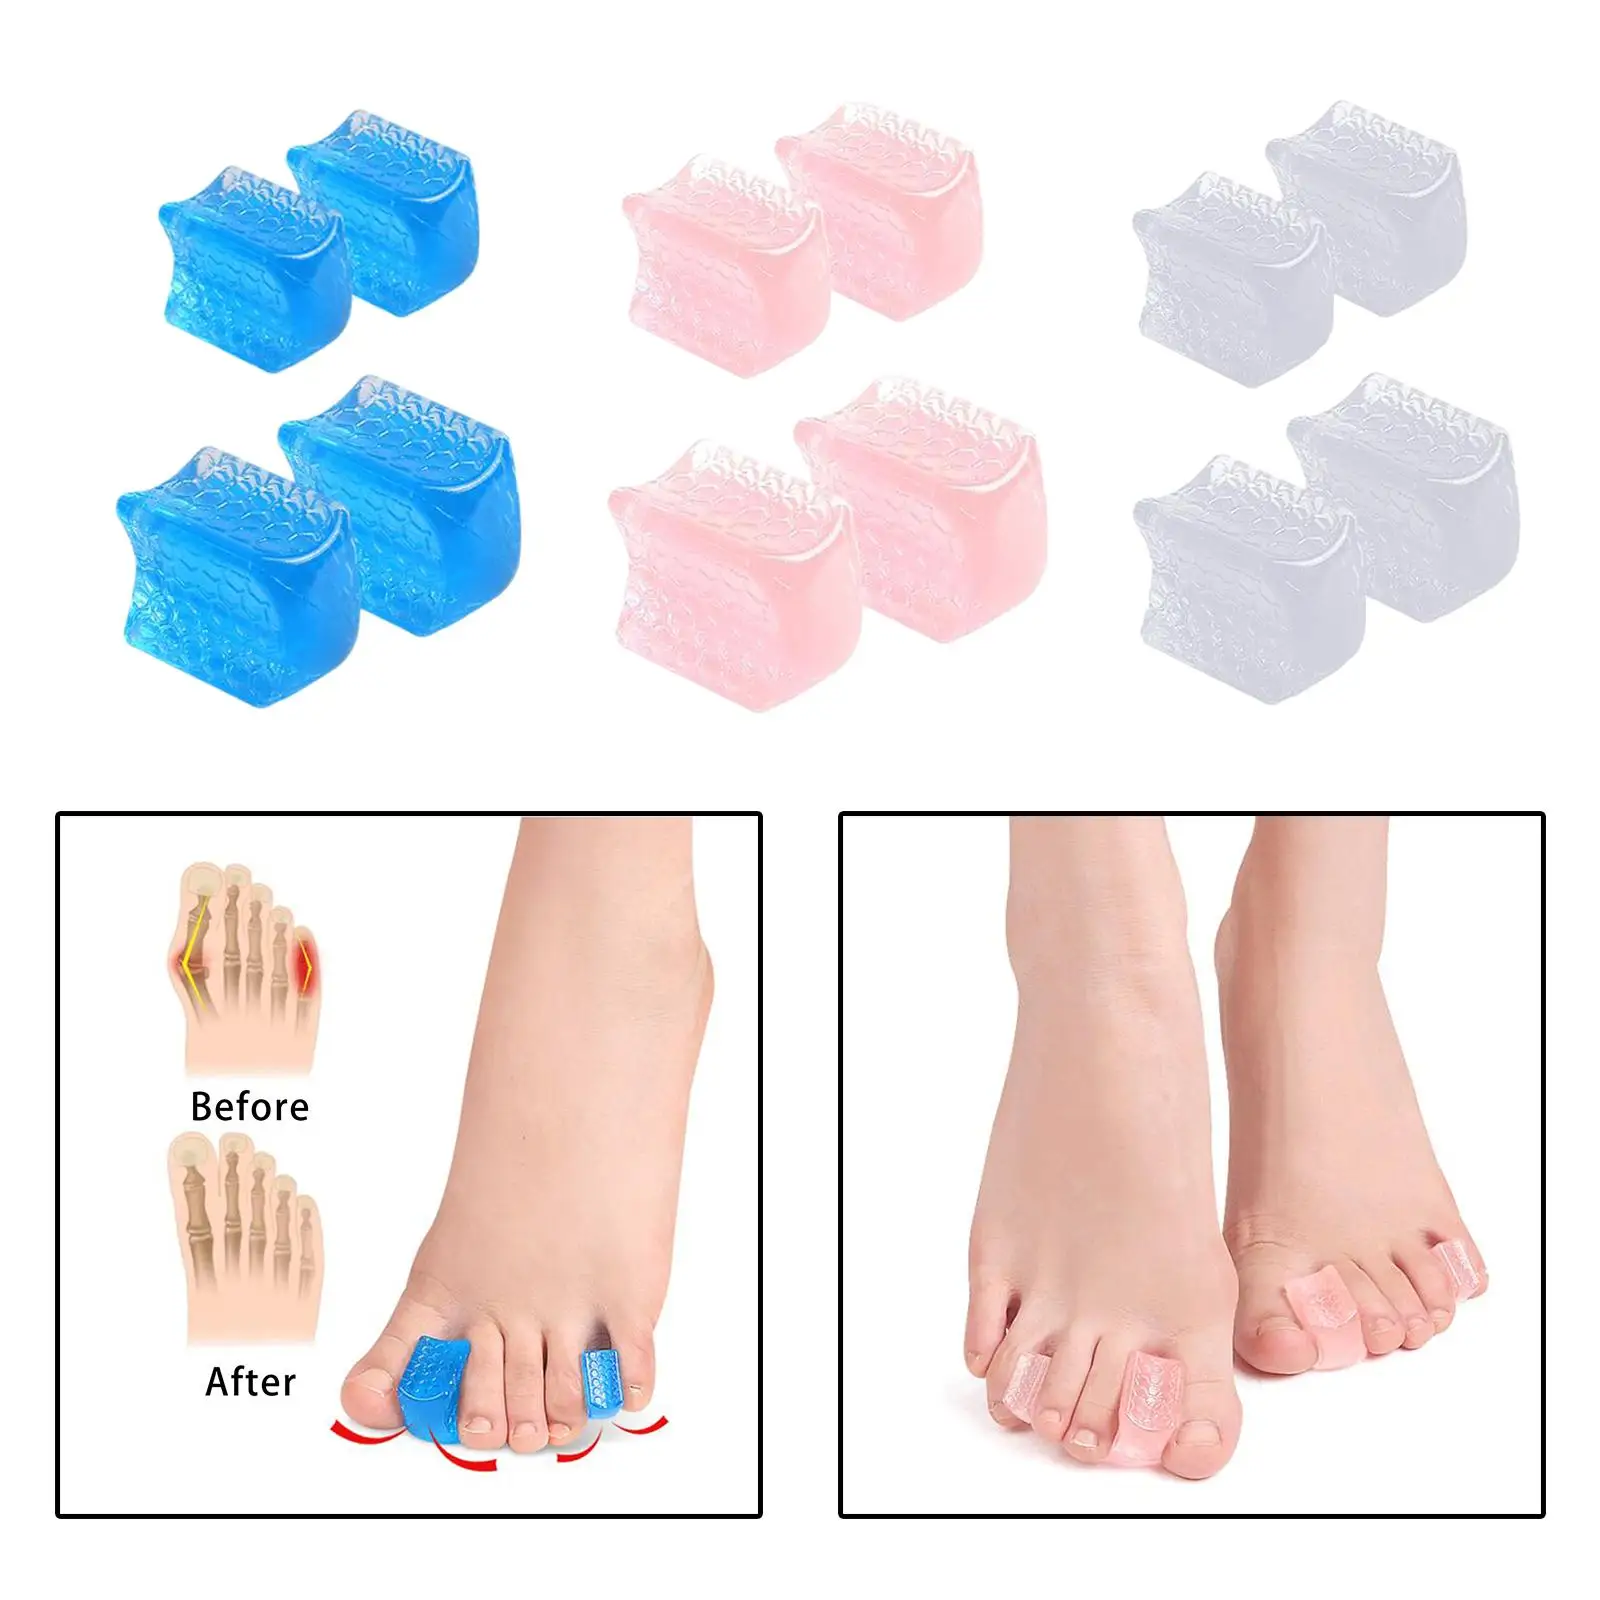 4x Toe Separators Corrector Straightener Separate Curled Overlapping Toe for Women Men Washable Reusable Preventing Rubbing